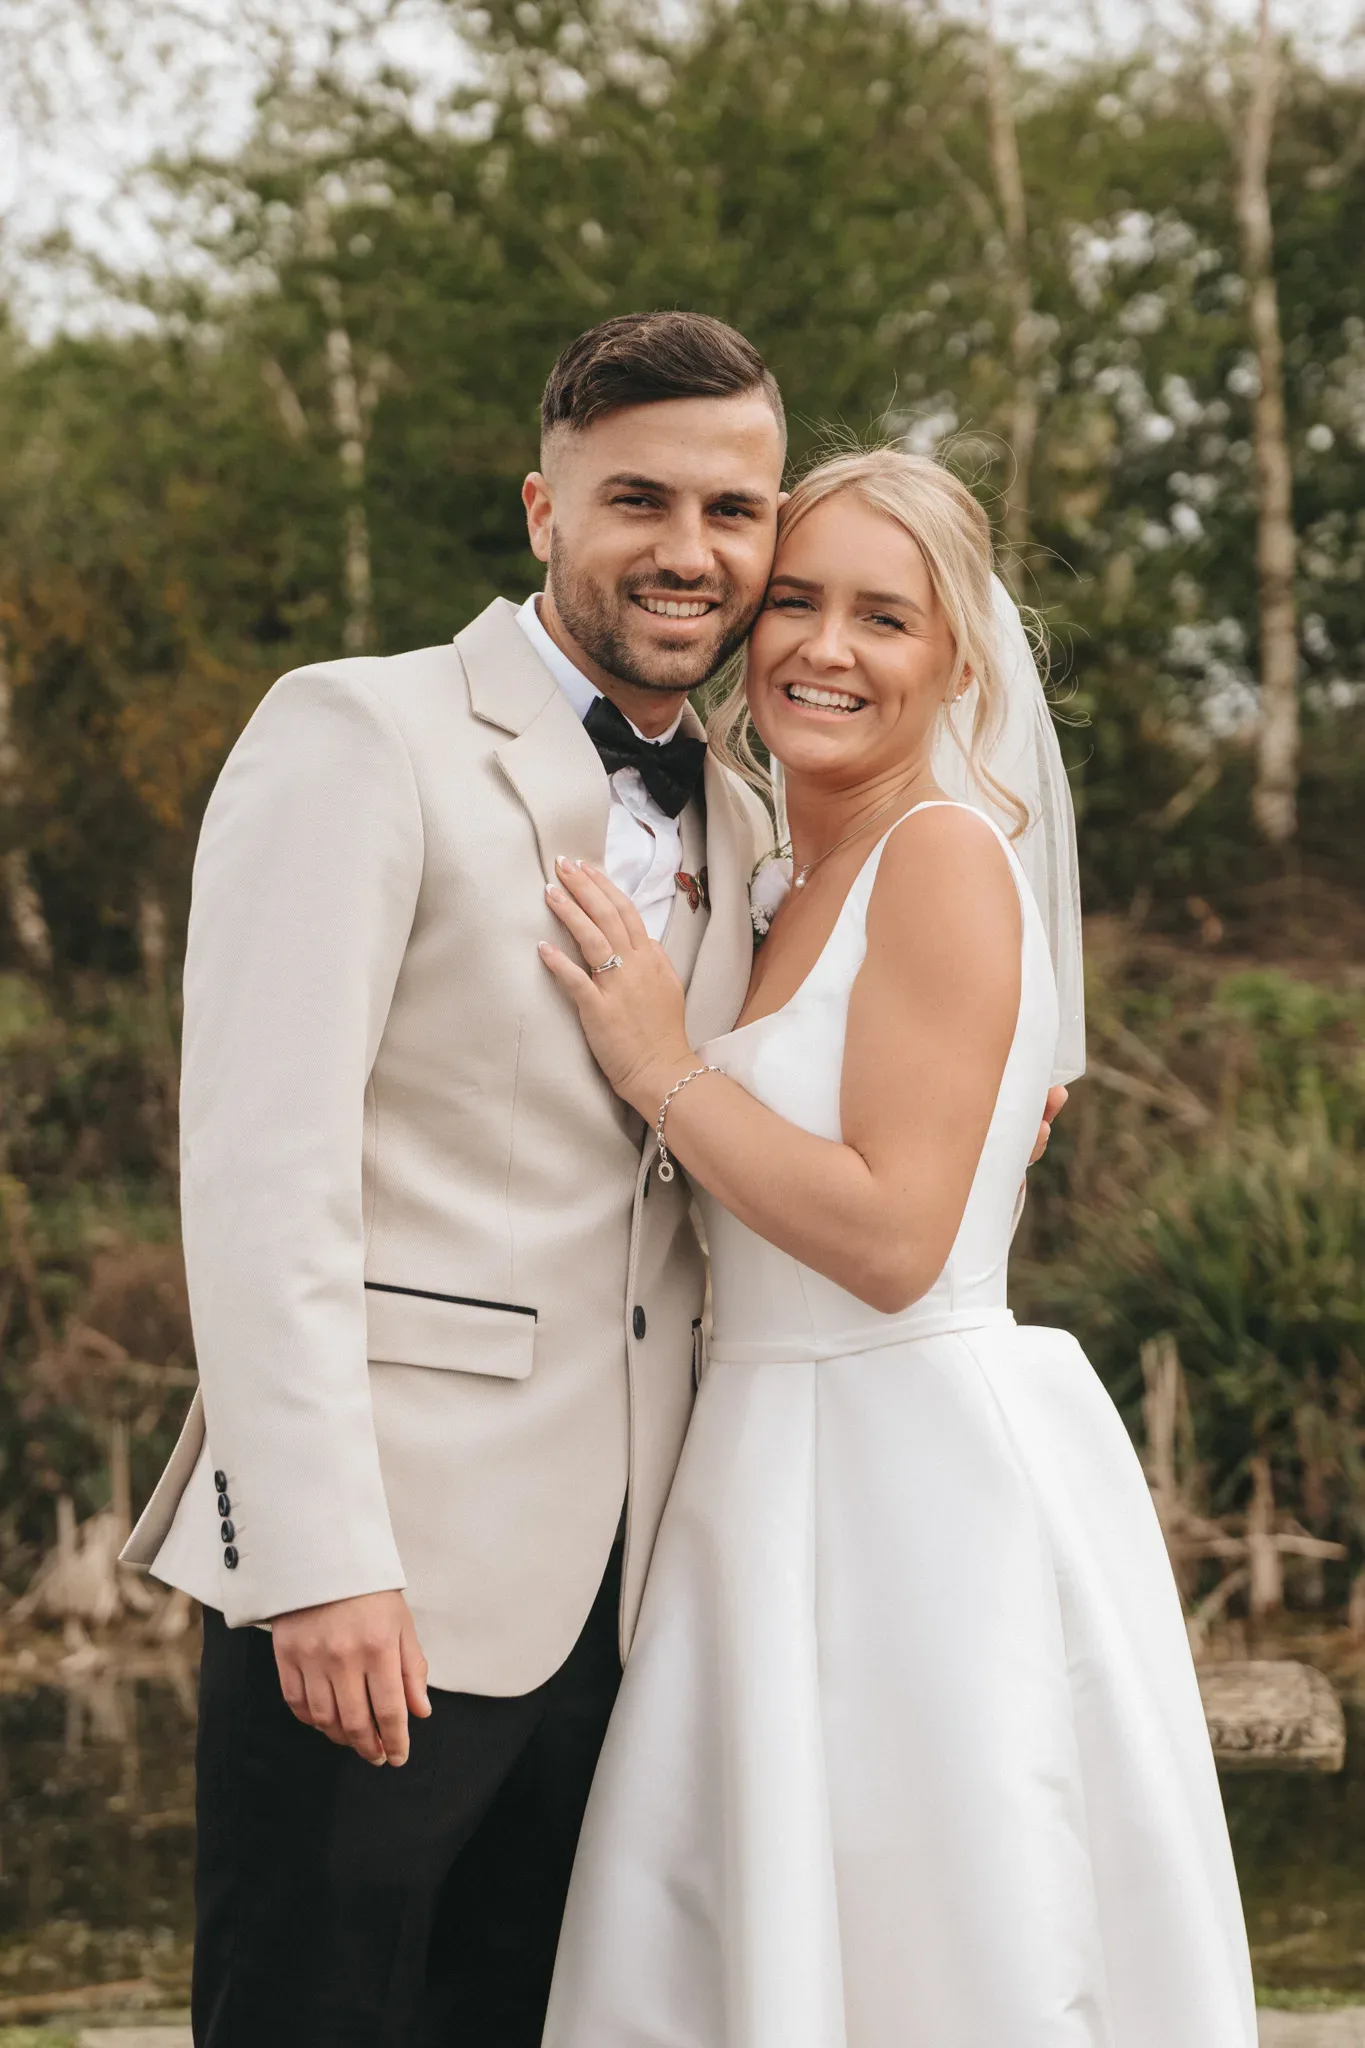 A newlywed couple posing happily outdoors. the groom, in a cream suit, embraces the bride, who is in a classic white dress with a veil. a serene, natural backdrop with soft focus adds to the romantic setting.